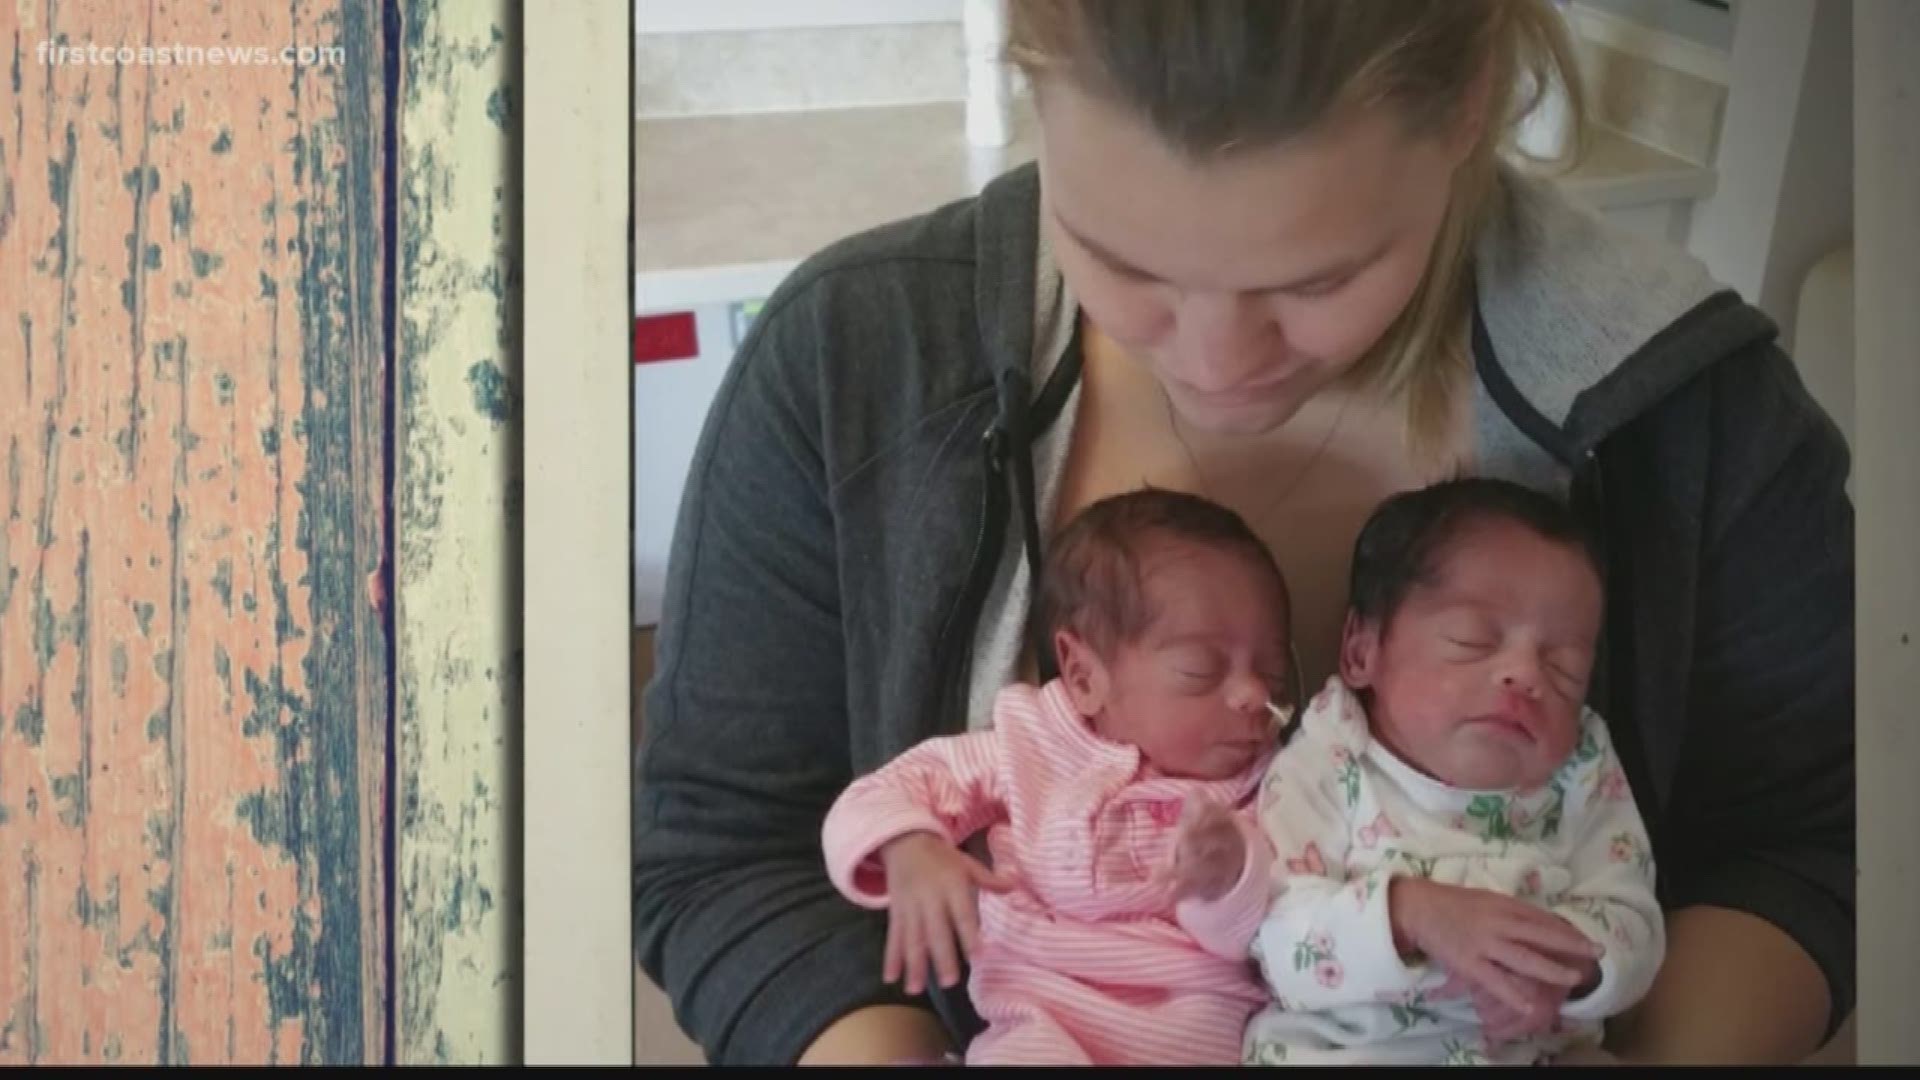 Three years ago, Megan Hiatt's twin babies were murdered in her arms. Her own father was also shot to death right in front of her. She is now speaking out about her journey to recovery and hope.